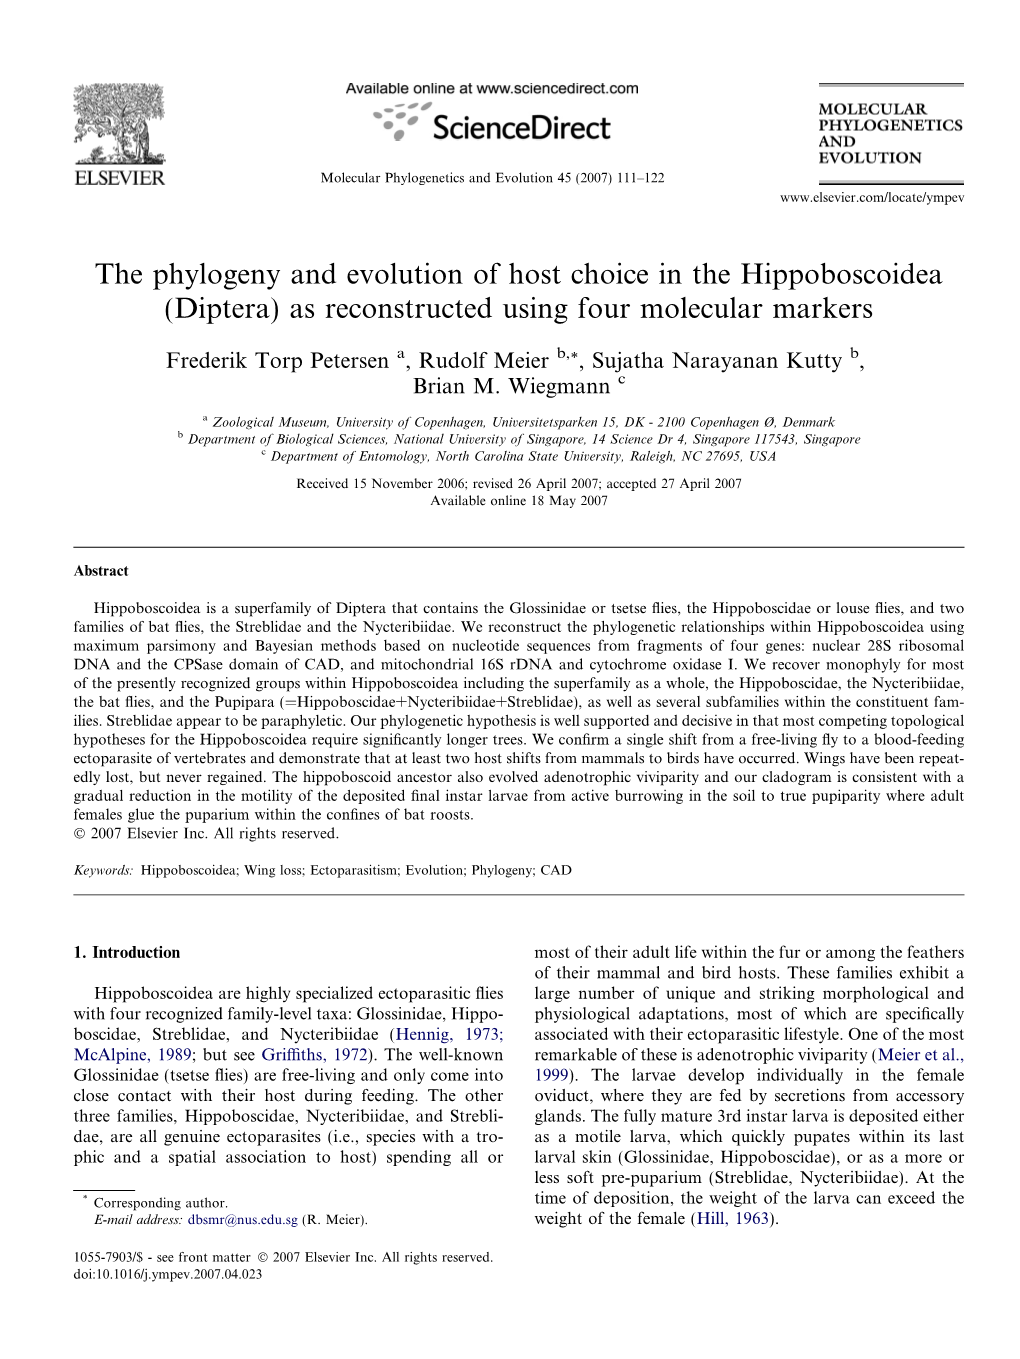 The Phylogeny and Evolution of Host Choice in the Hippoboscoidea (Diptera) As Reconstructed Using Four Molecular Markers